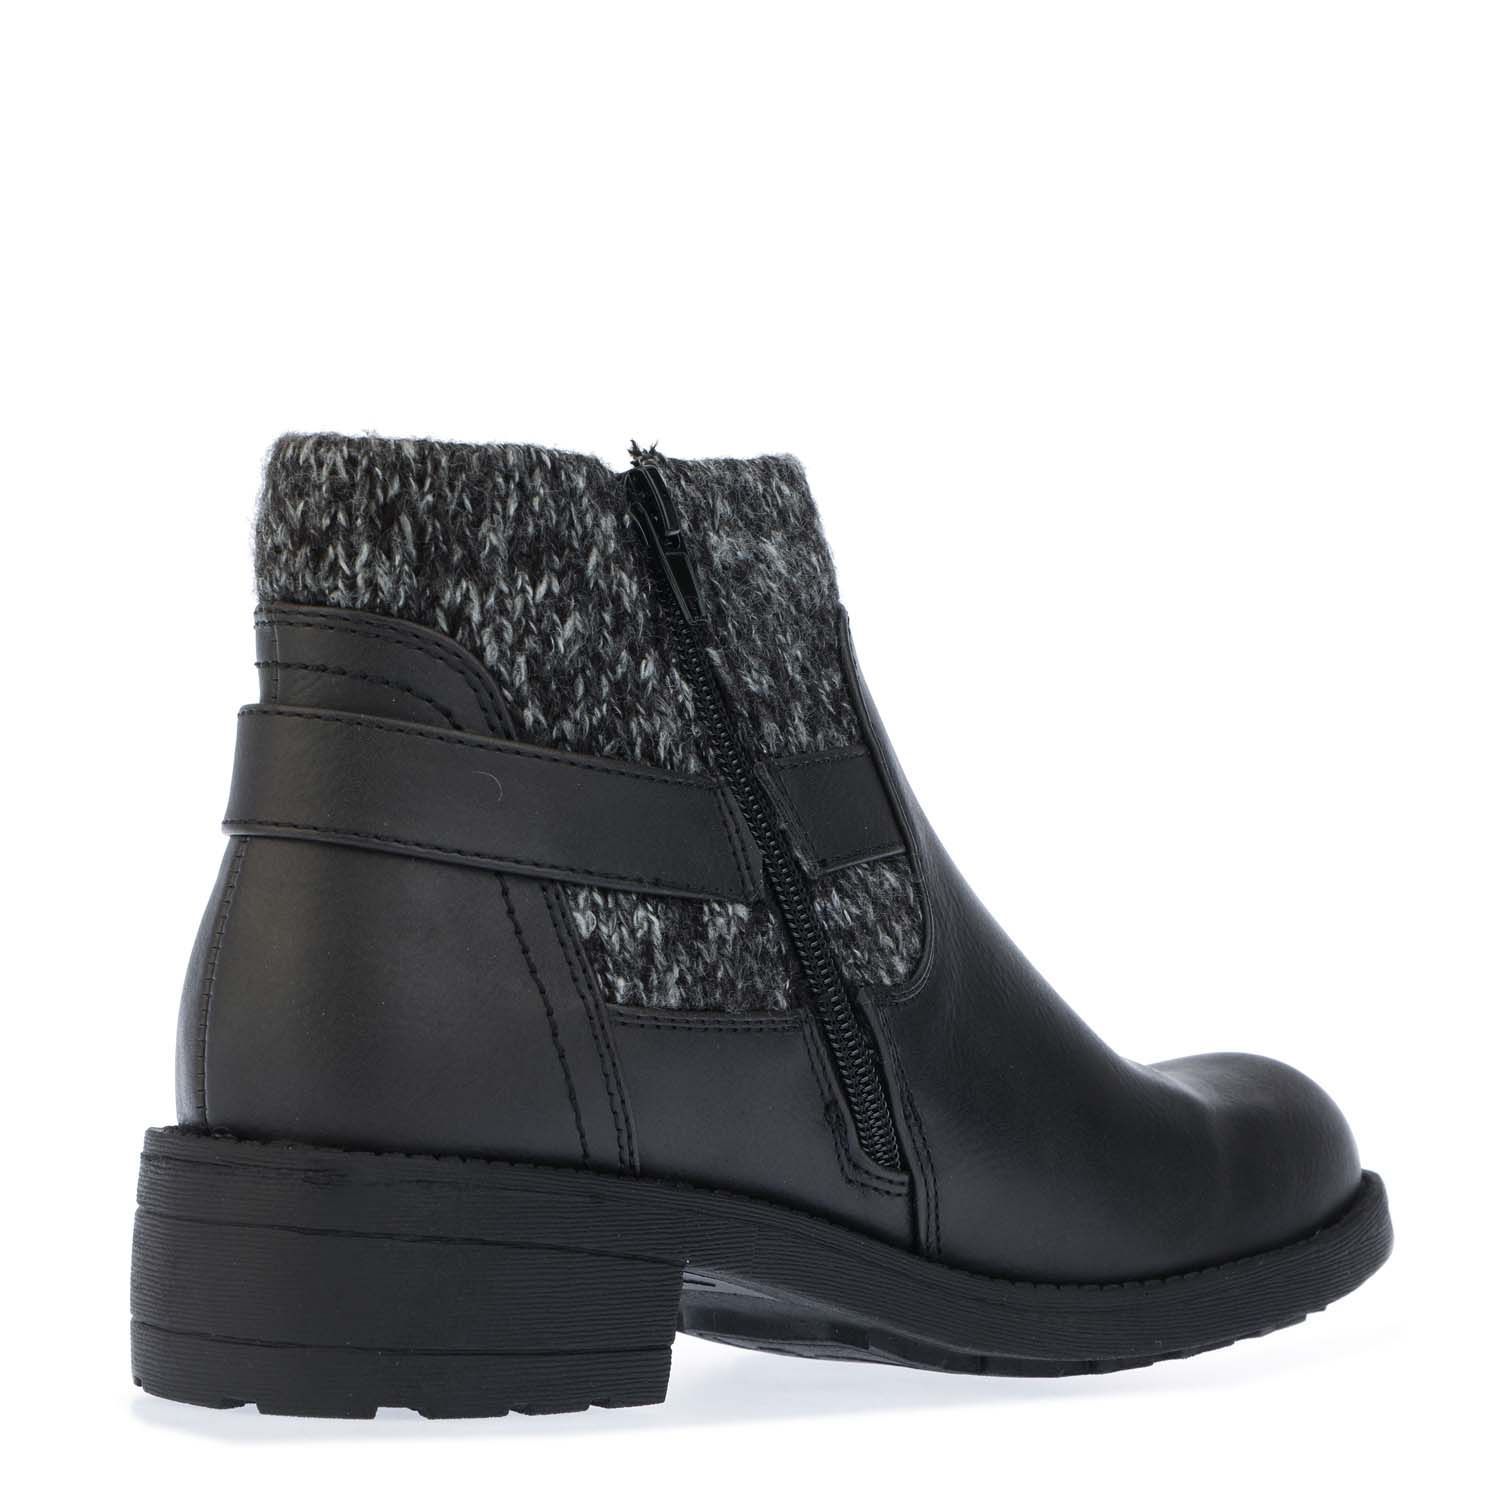 Womens Rocket Dog Tegal Santee Boots in black.- Synthetic and textile upper.- Inside zip closure.- Knitted collar. - Debossed branding.- Reinforced heel and toe.- Textile lining.- Rubber sole.- Ref.: TEGALSANTEE